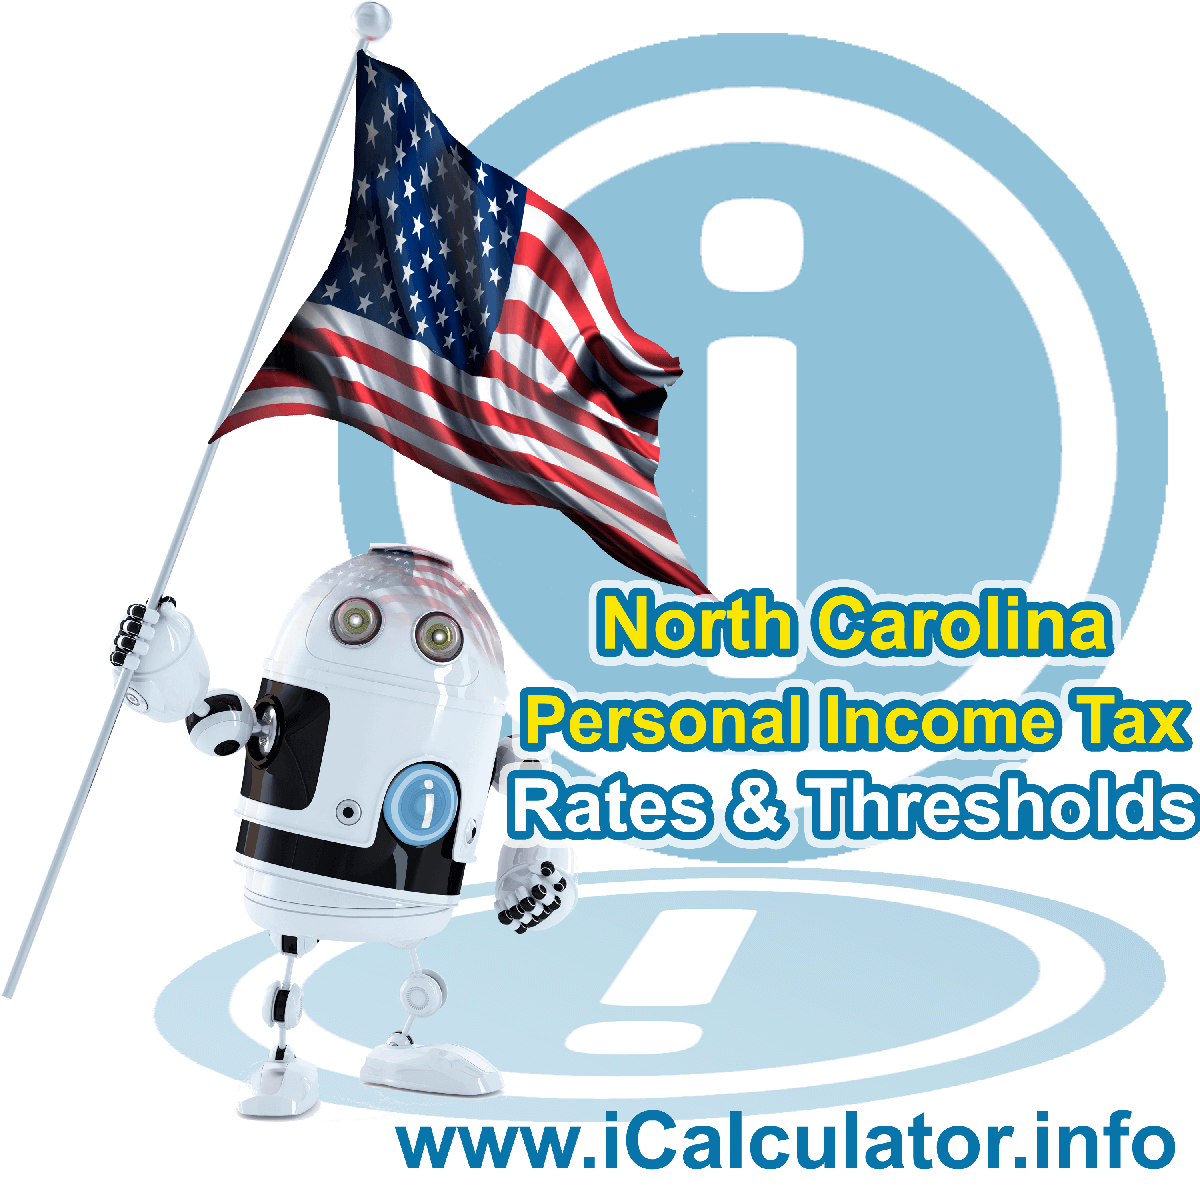 North Carolina State Tax Tables 2015. This image displays details of the North Carolina State Tax Tables for the 2015 tax return year which is provided in support of the 2015 US Tax Calculator